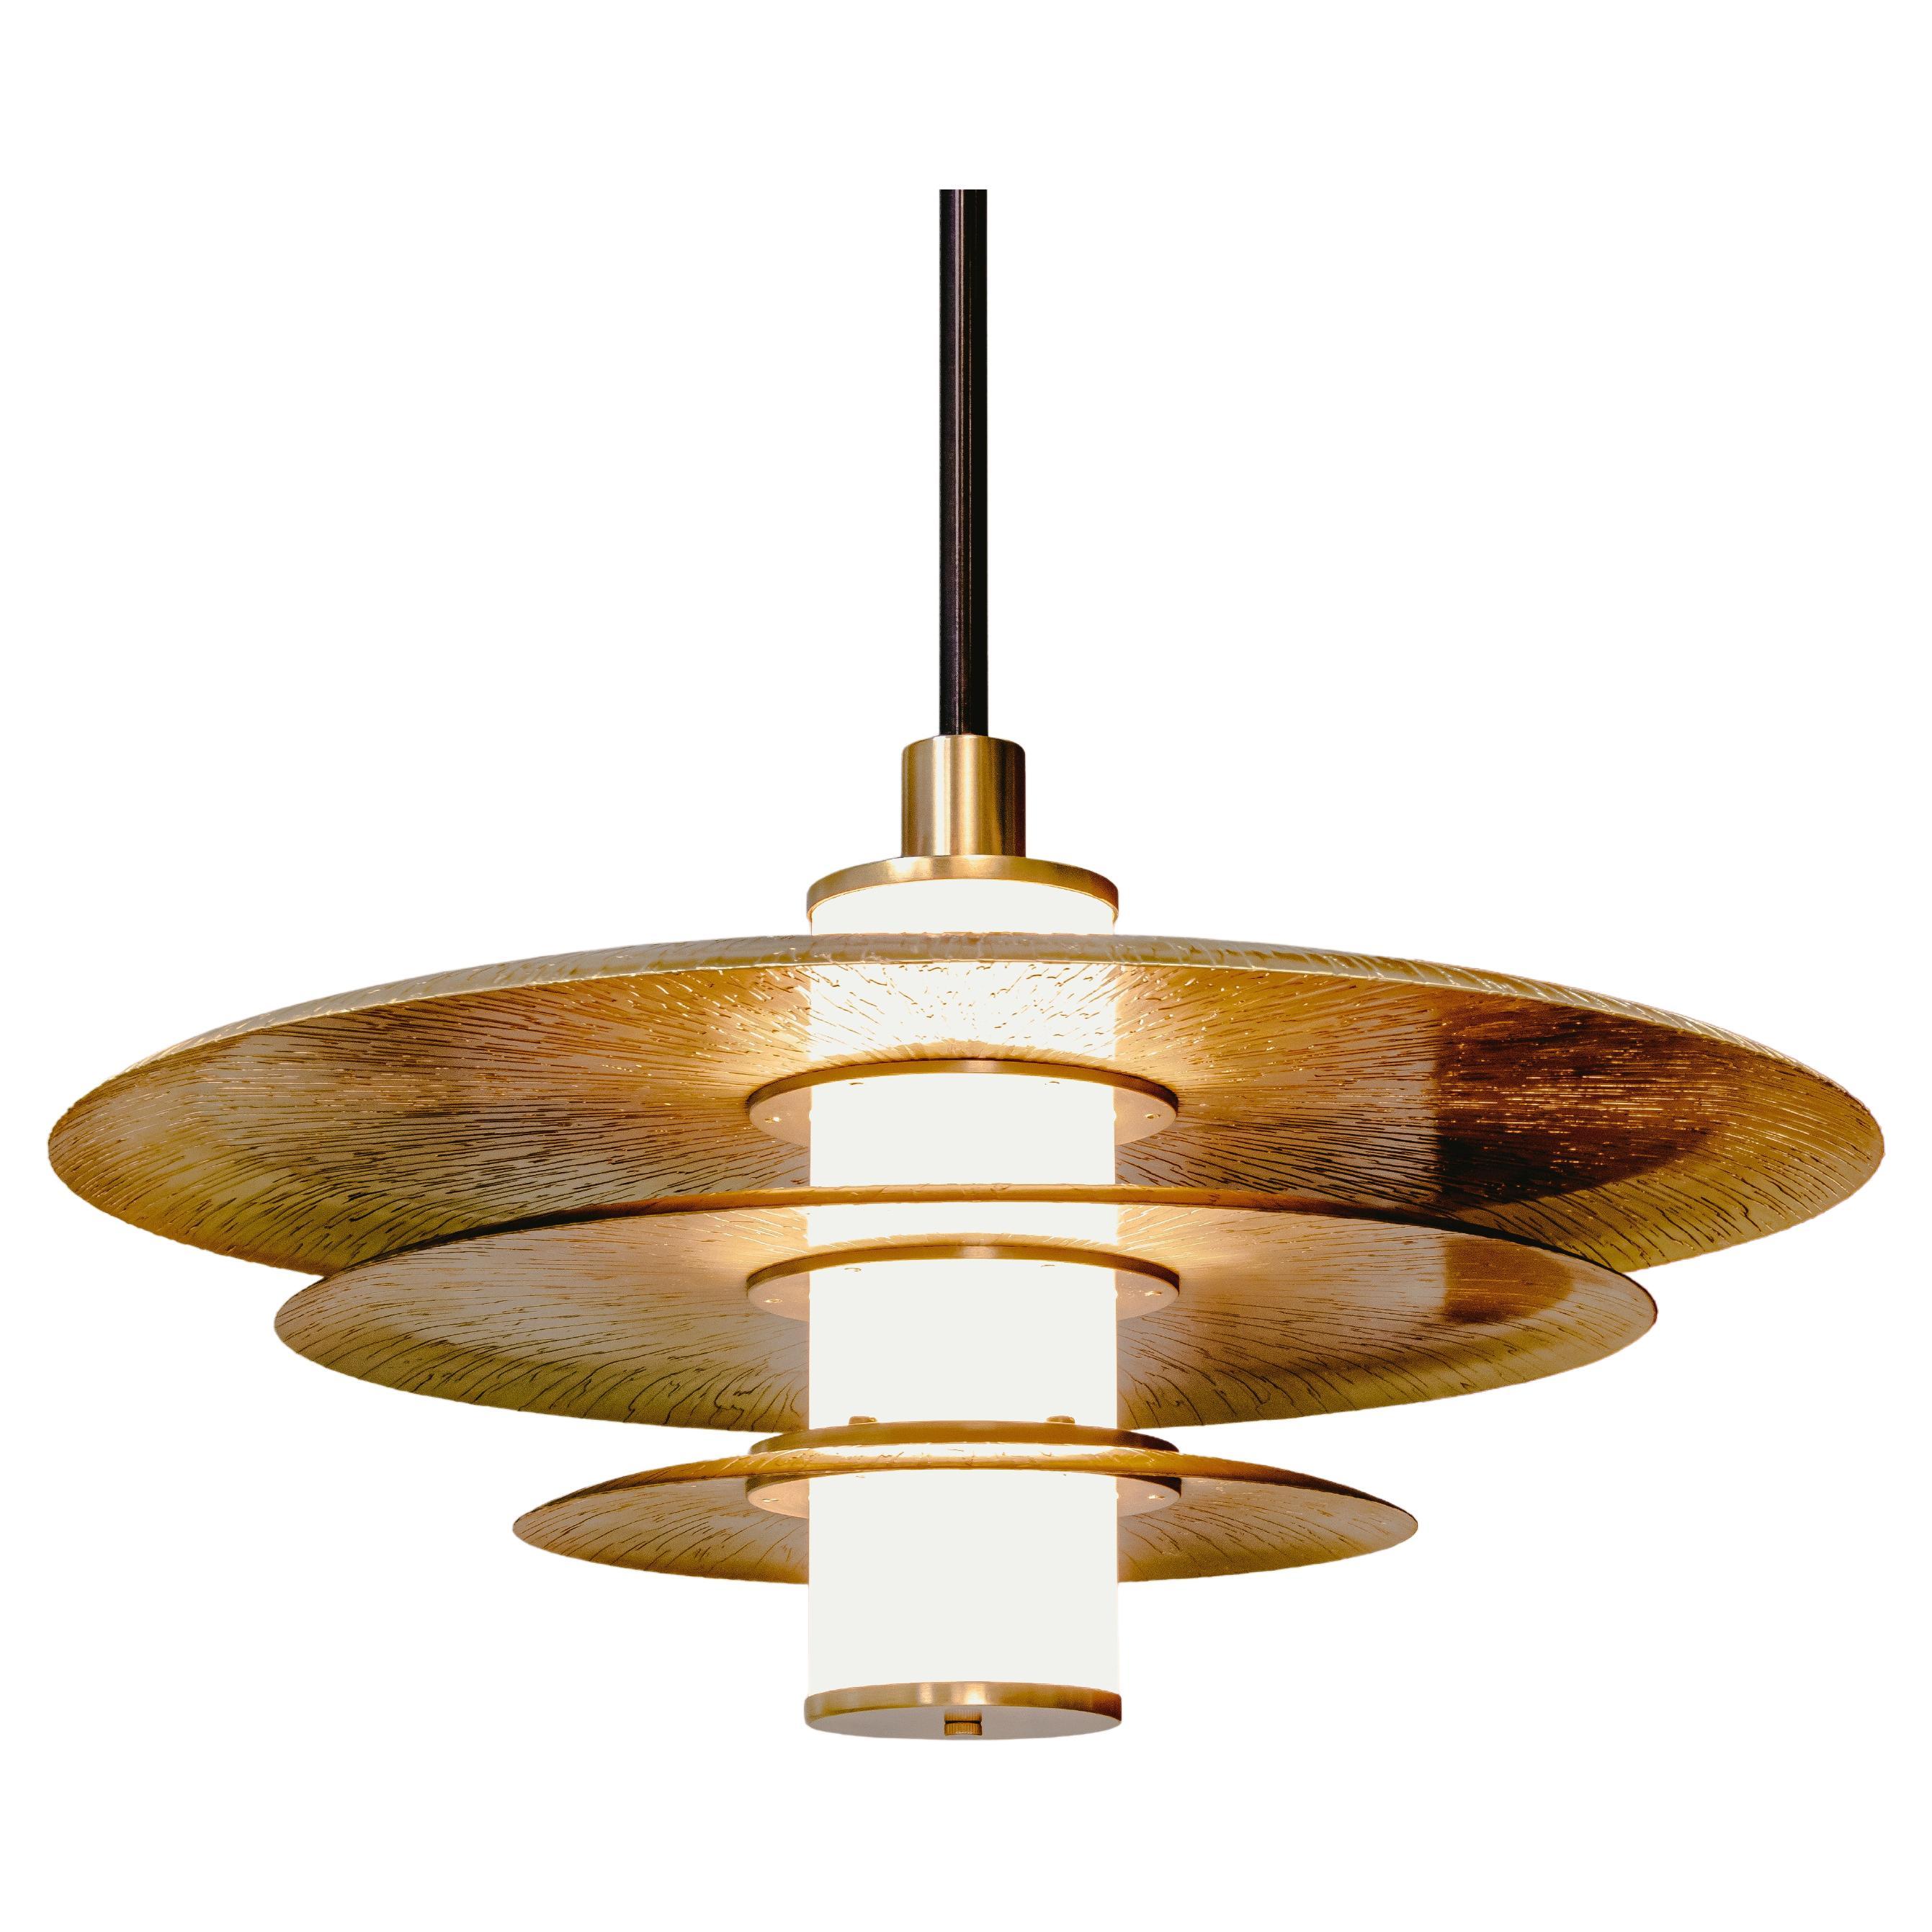 Tiered Arthur Pendant Light in Etched Brass, White Glass and Blackened Brass